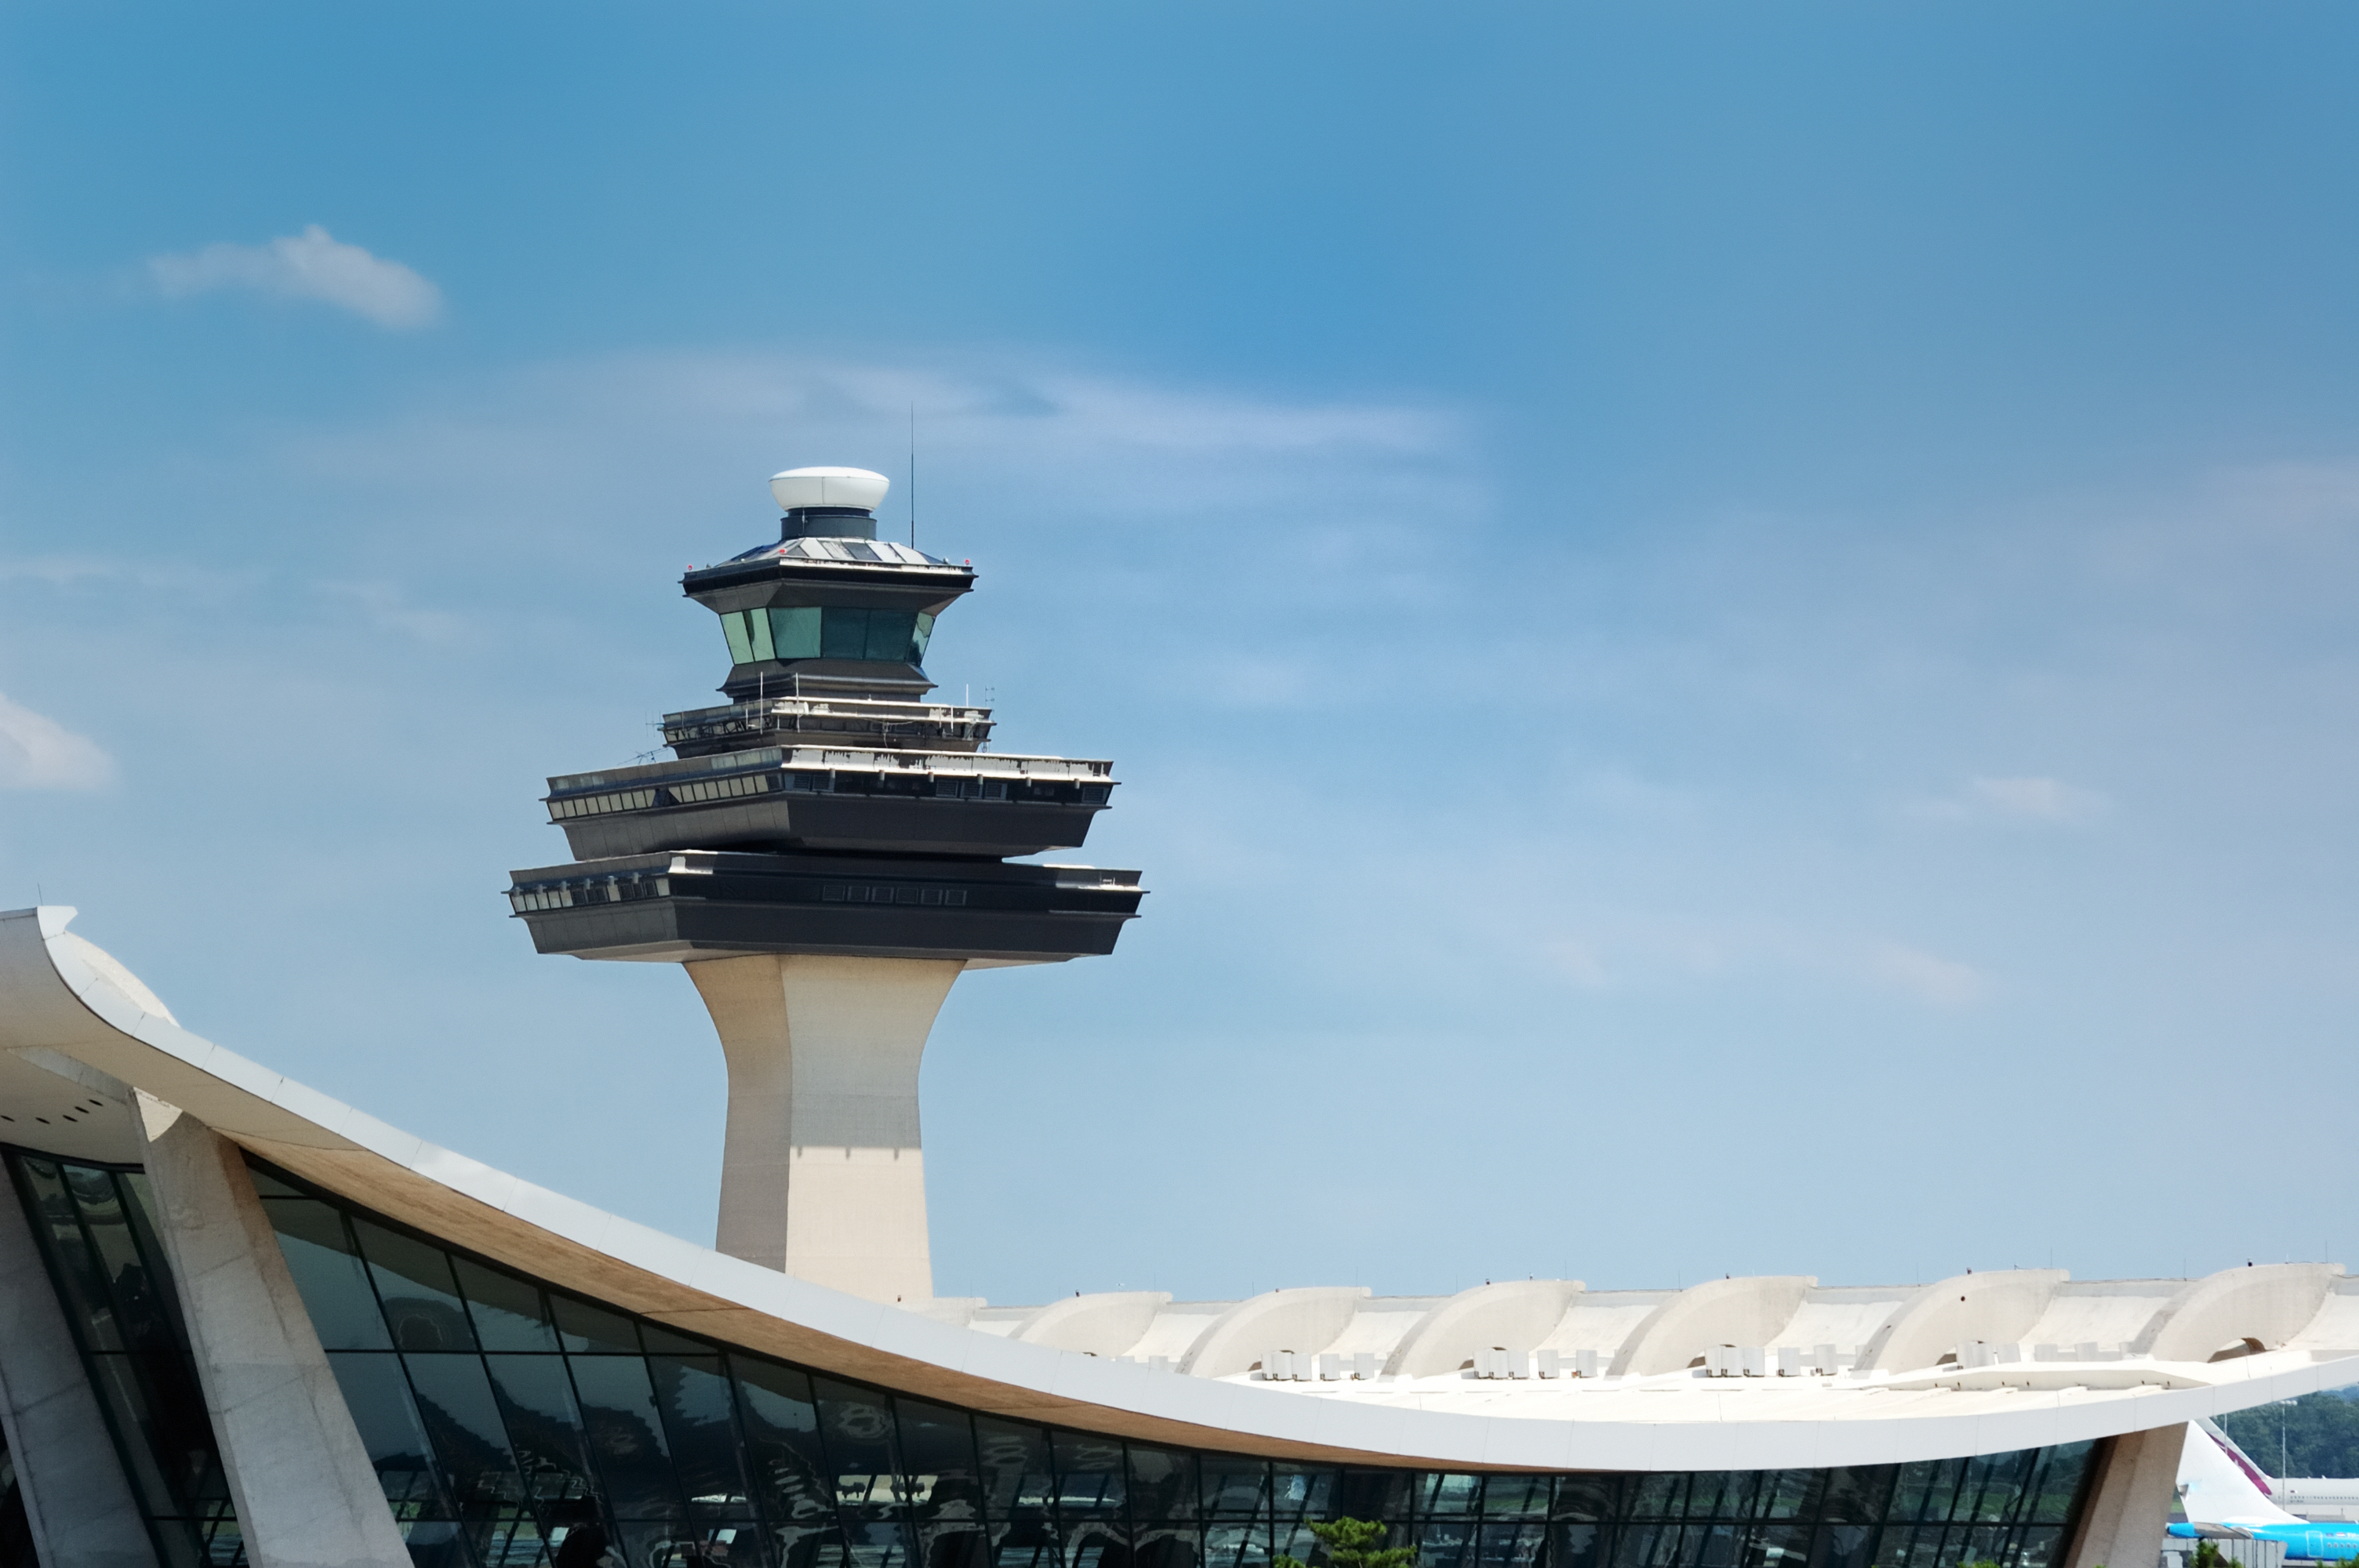 Dulles airport in Virginia, featuring the terminal and tower